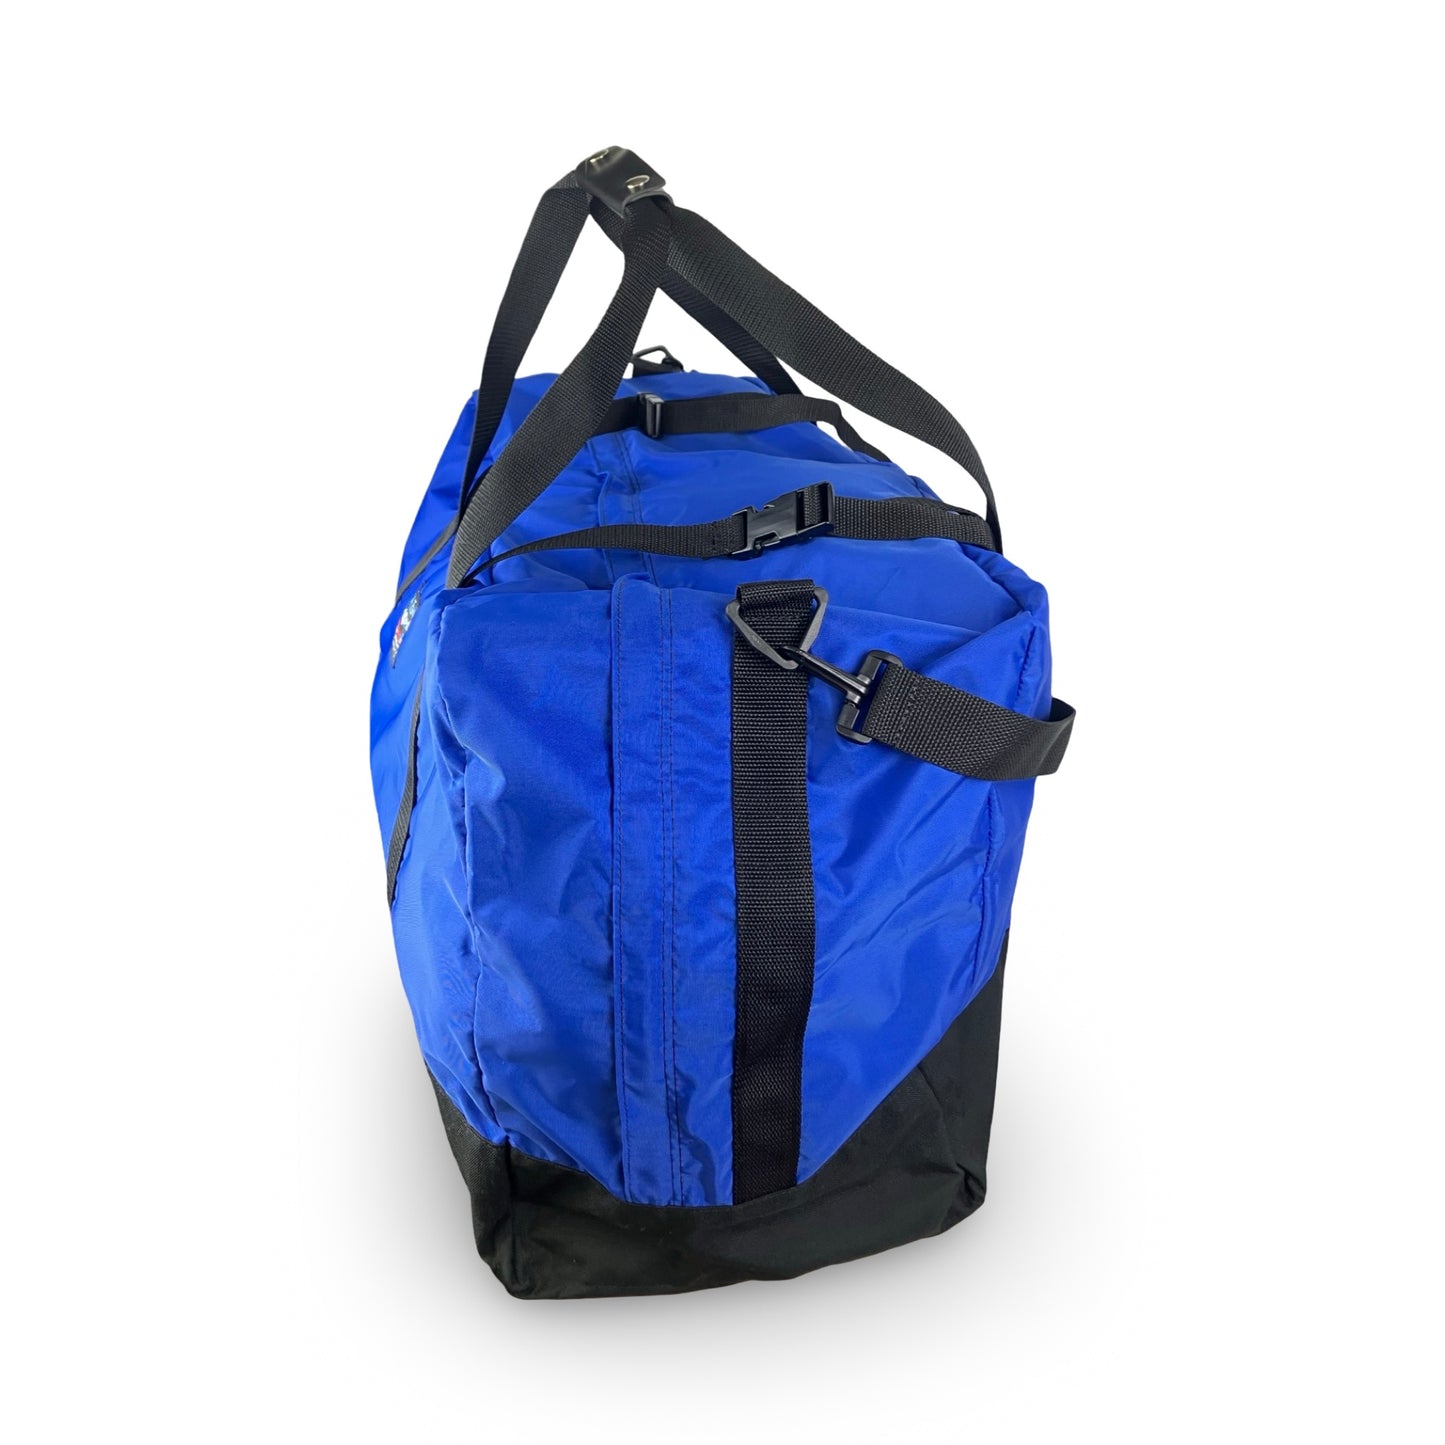 EXPEDITION Duffel Duffel Bags, by Tough Traveler. Made in USA since 1970